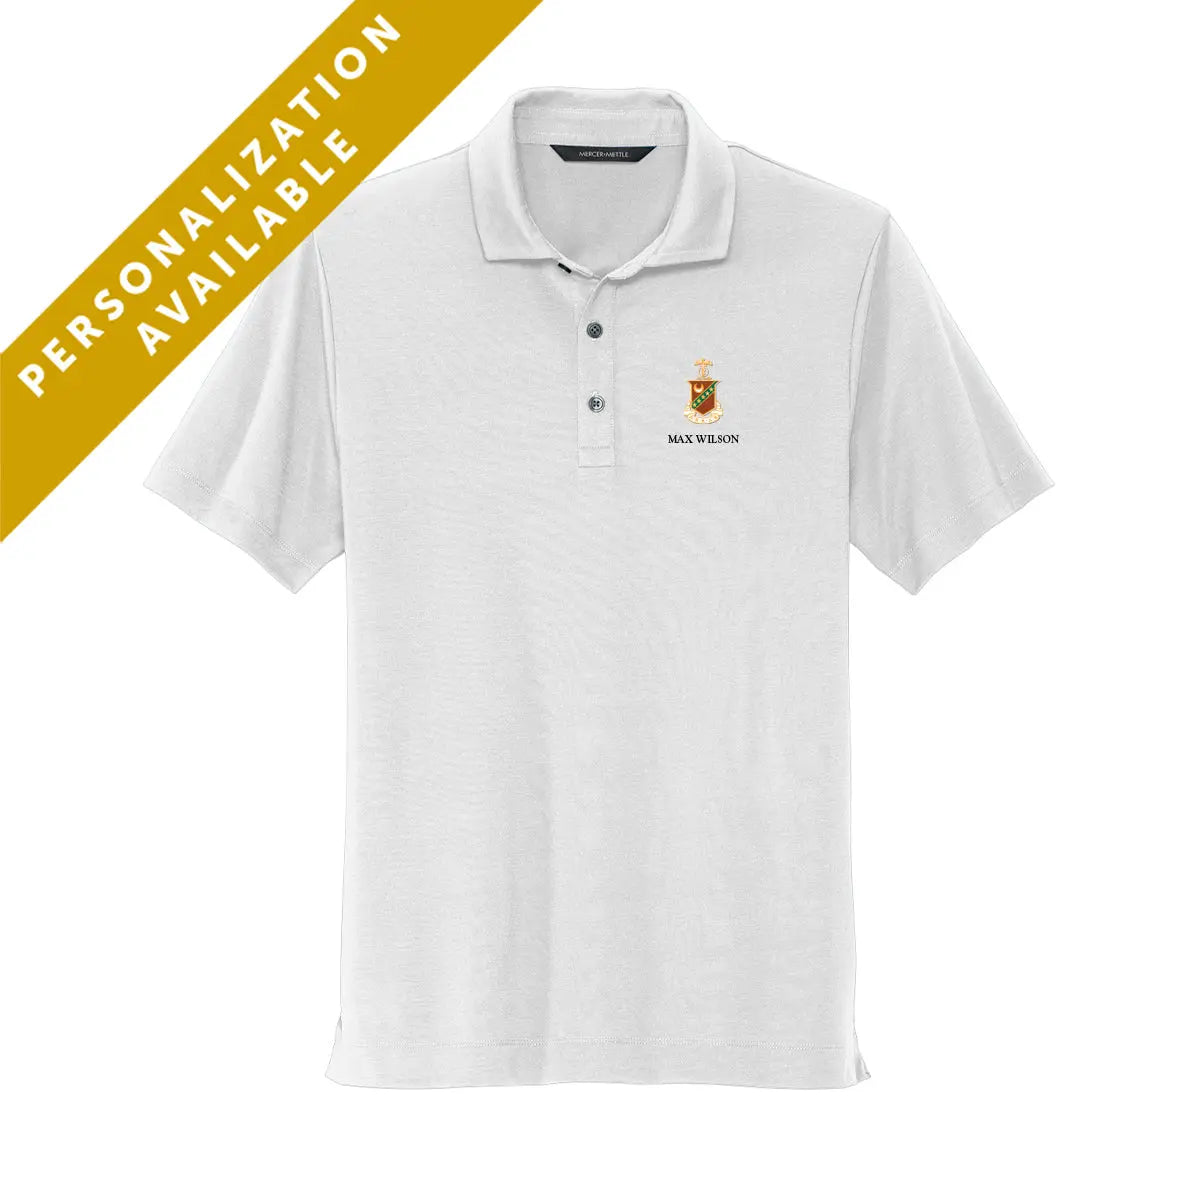 Kappa Sig White Crest Polo - Kappa Sigma Official Store